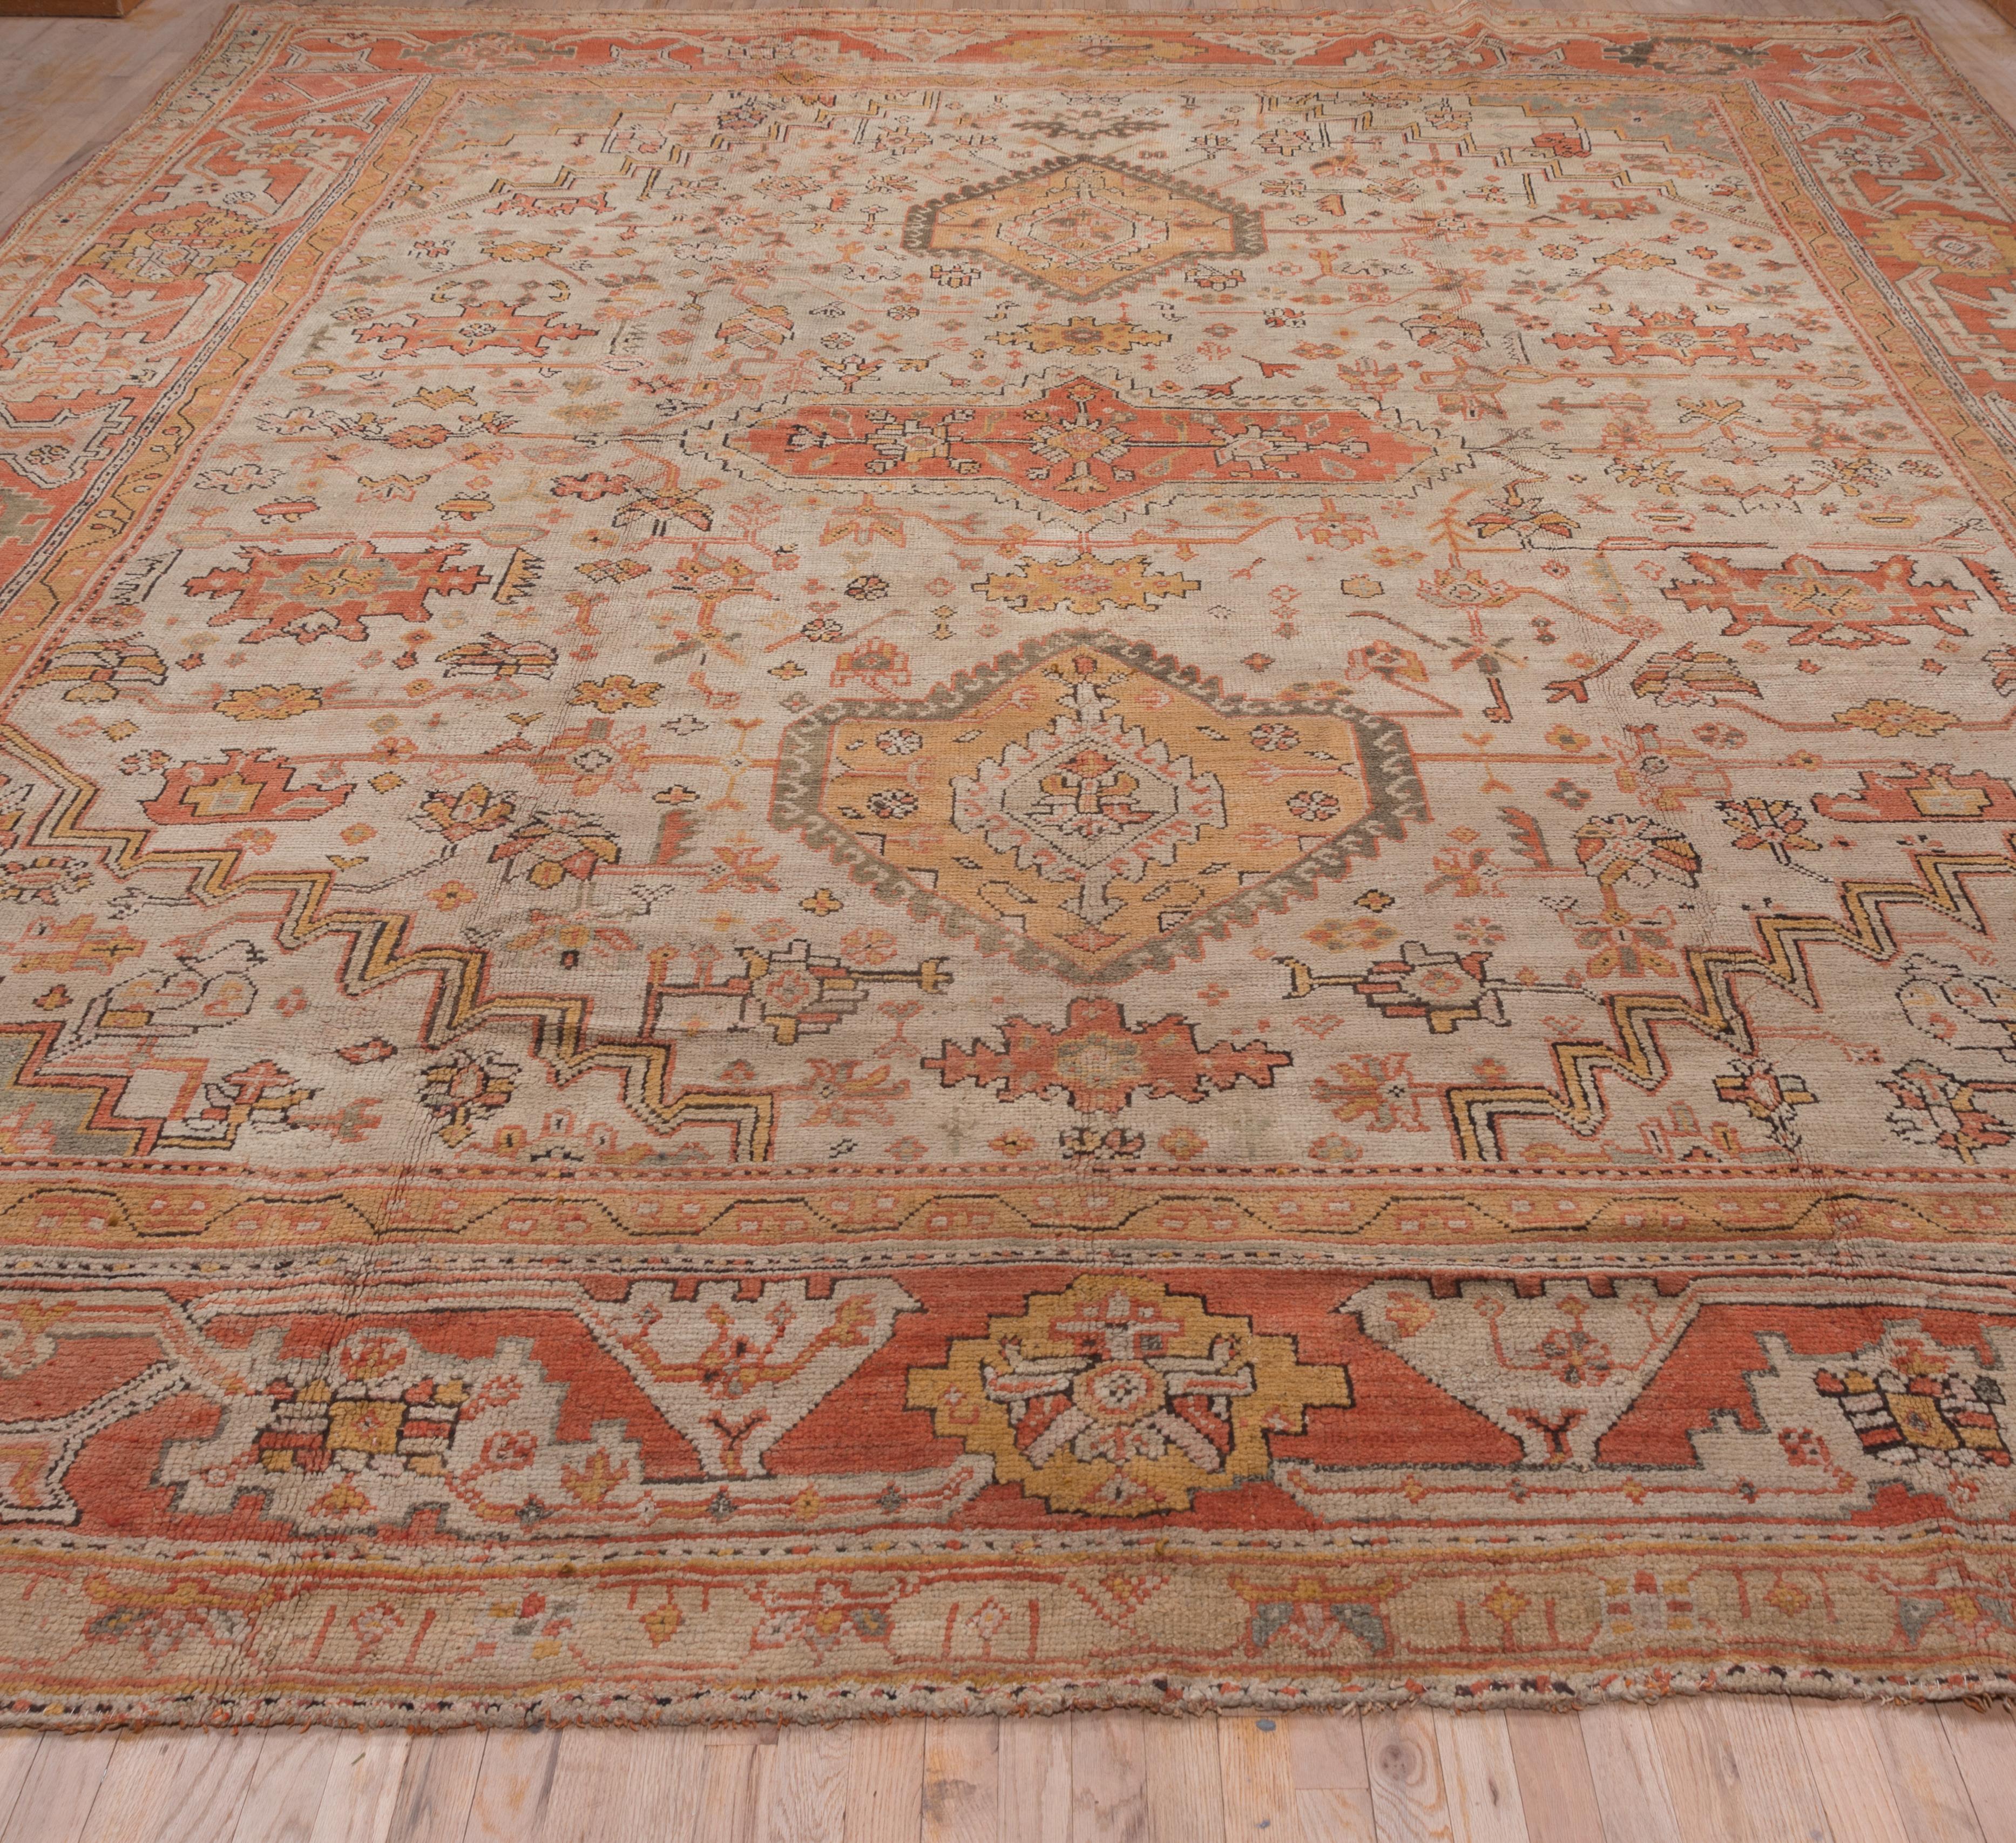 Incredible Antique Oushak Turkish Carpet, Amazing Colors, Allover Field, 1900s For Sale 2